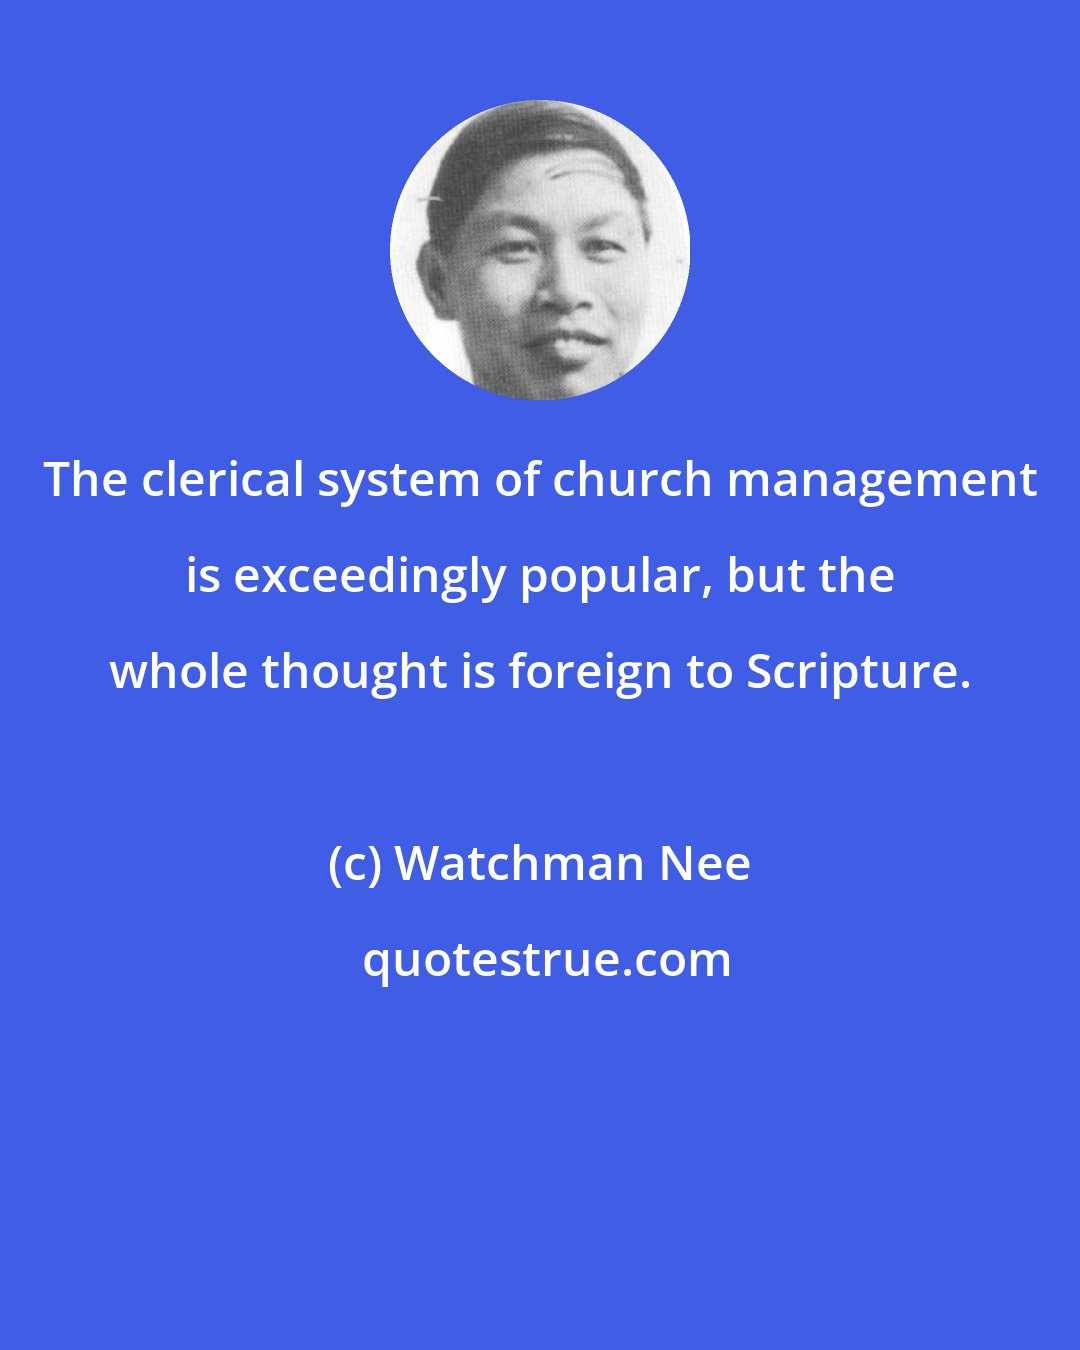 Watchman Nee: The clerical system of church management is exceedingly popular, but the whole thought is foreign to Scripture.